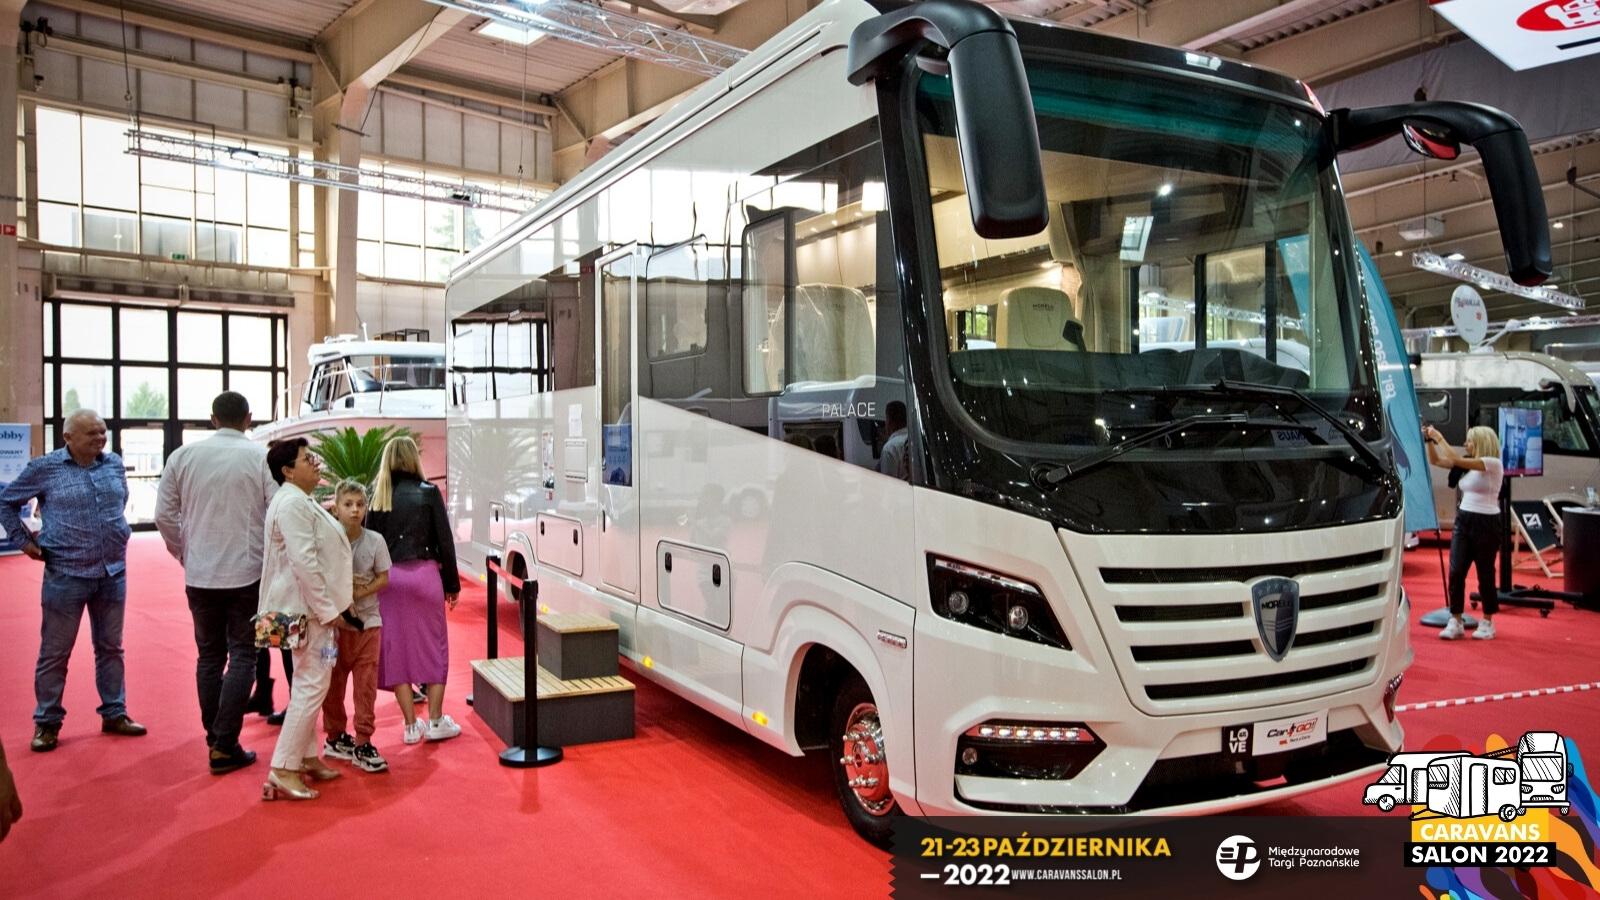 This is for sure! The 5th edition of Caravans Salon Poland in Poznań from 21 to 23 October 2022 – image 1